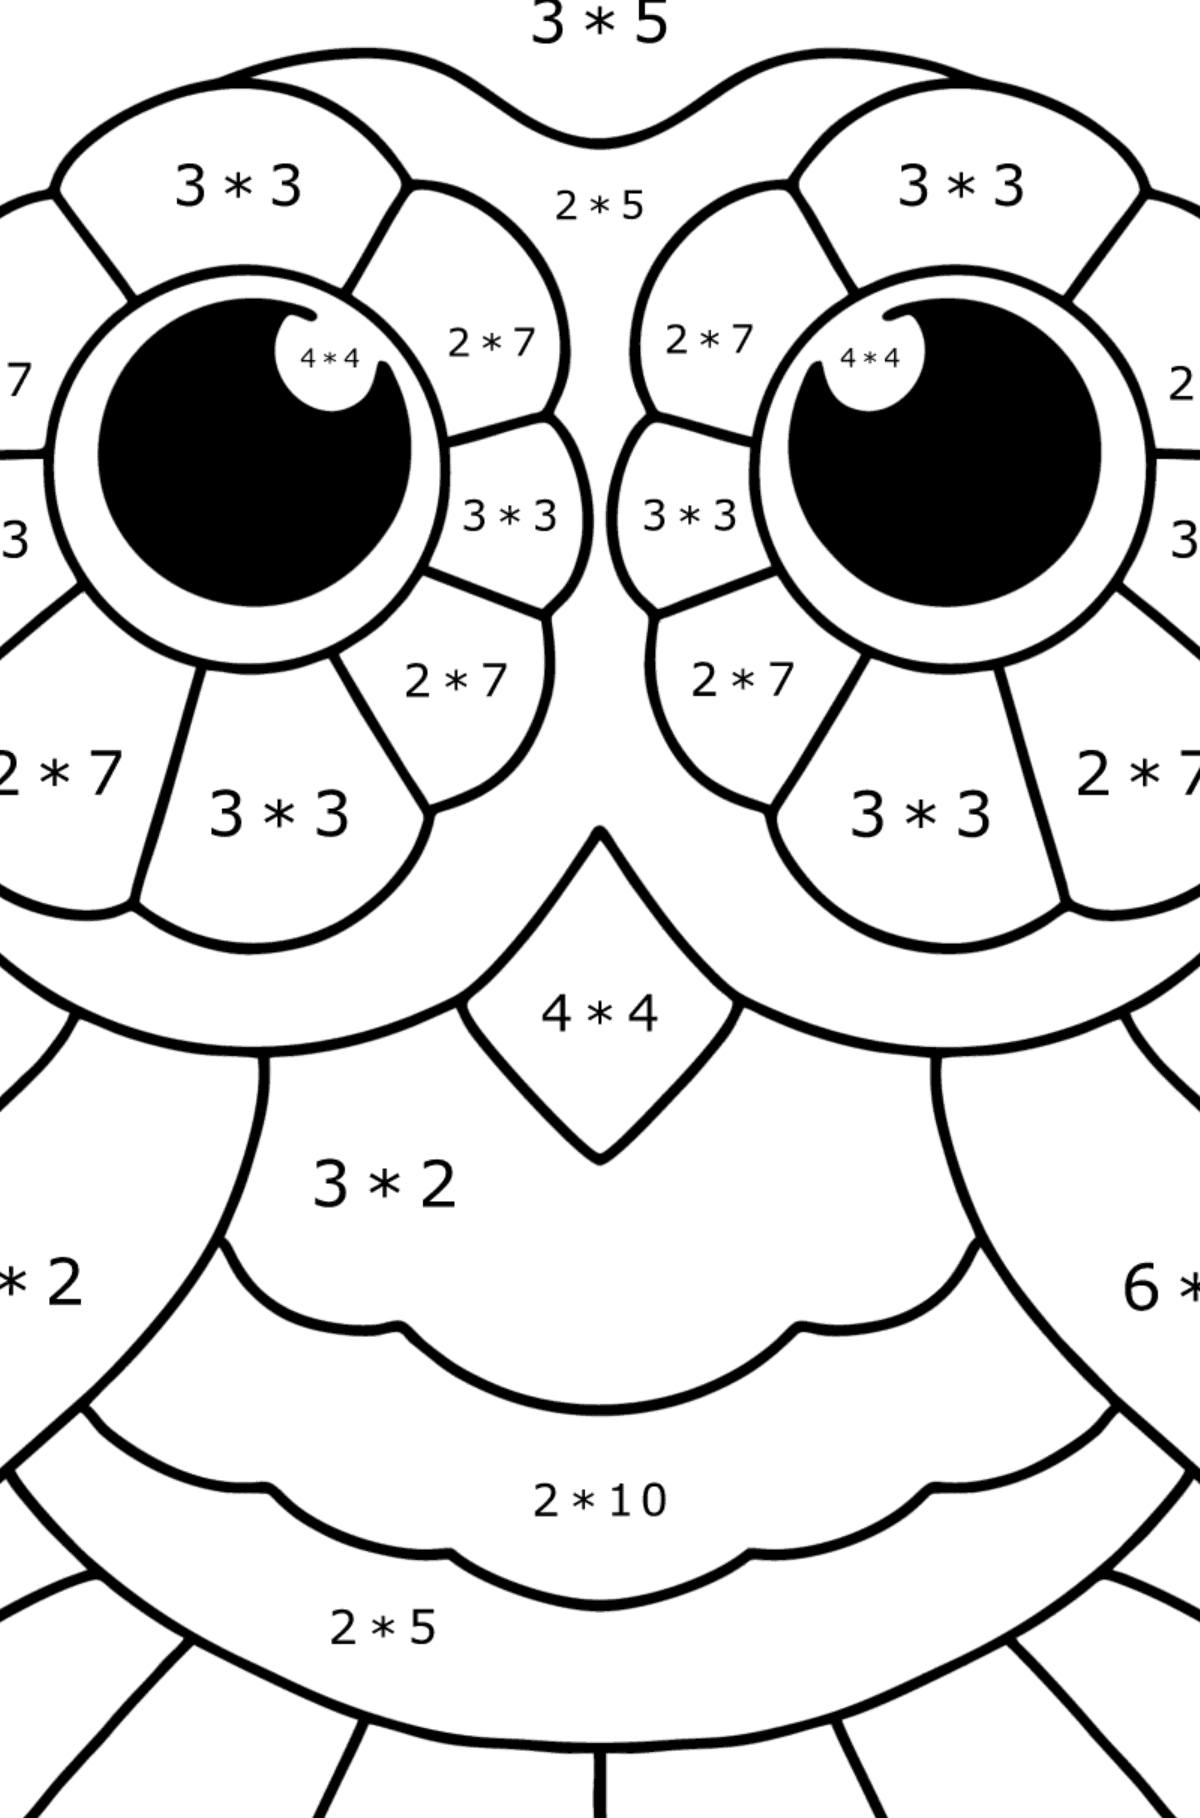 Easy stress relief coloring page - Owl - Math Coloring - Multiplication for Kids